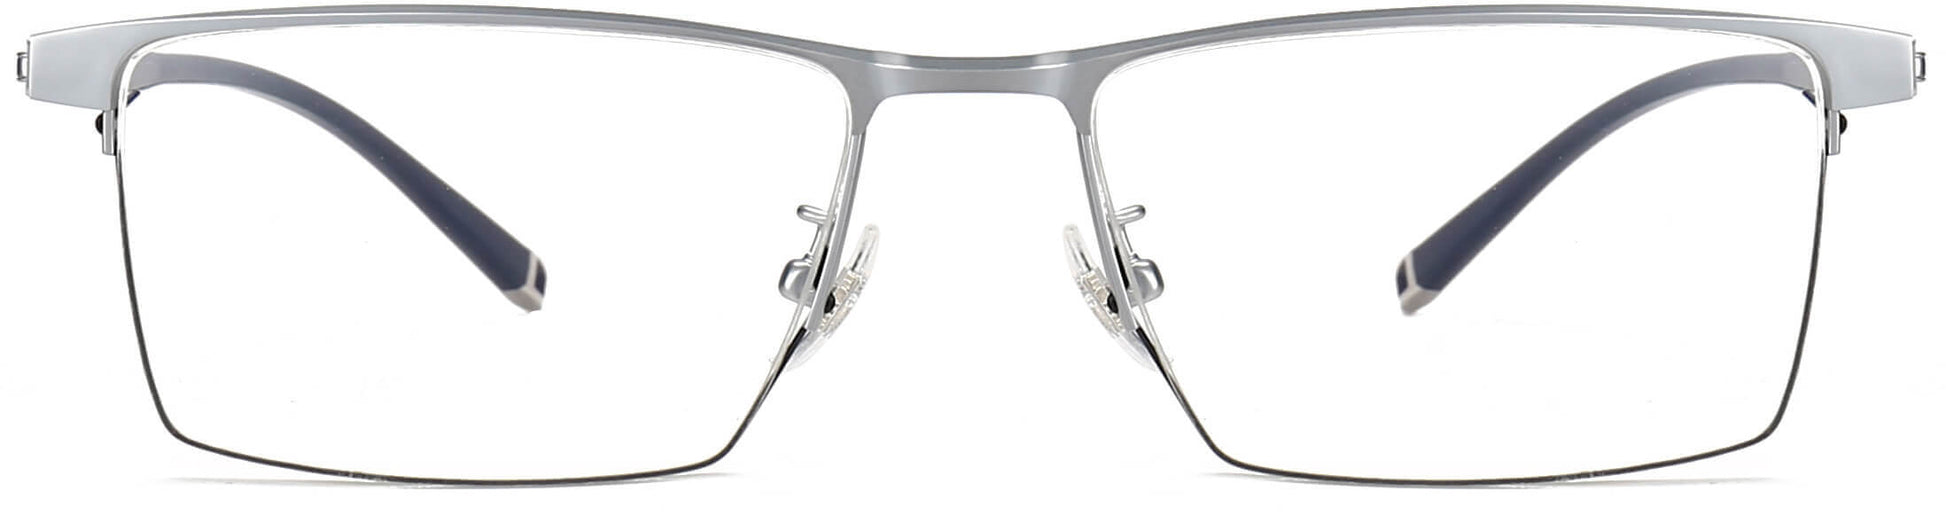 Chaim Square Silver Eyeglasses from ANRRI, front view